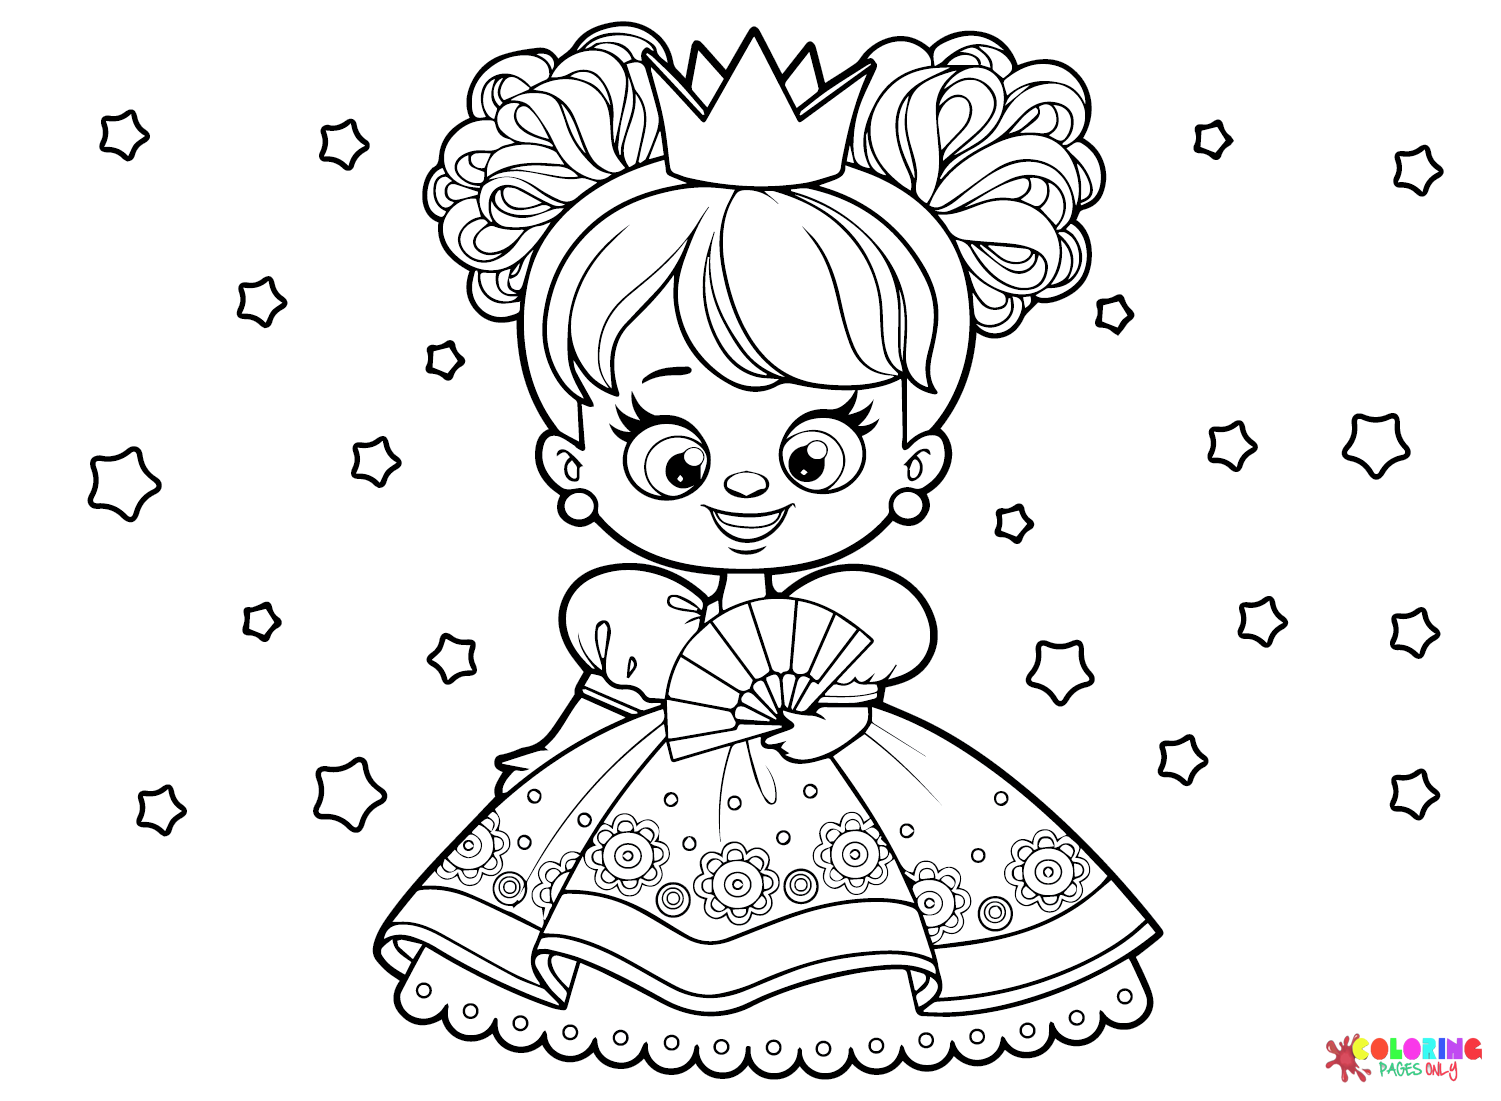 Queen for Kids Coloring Page